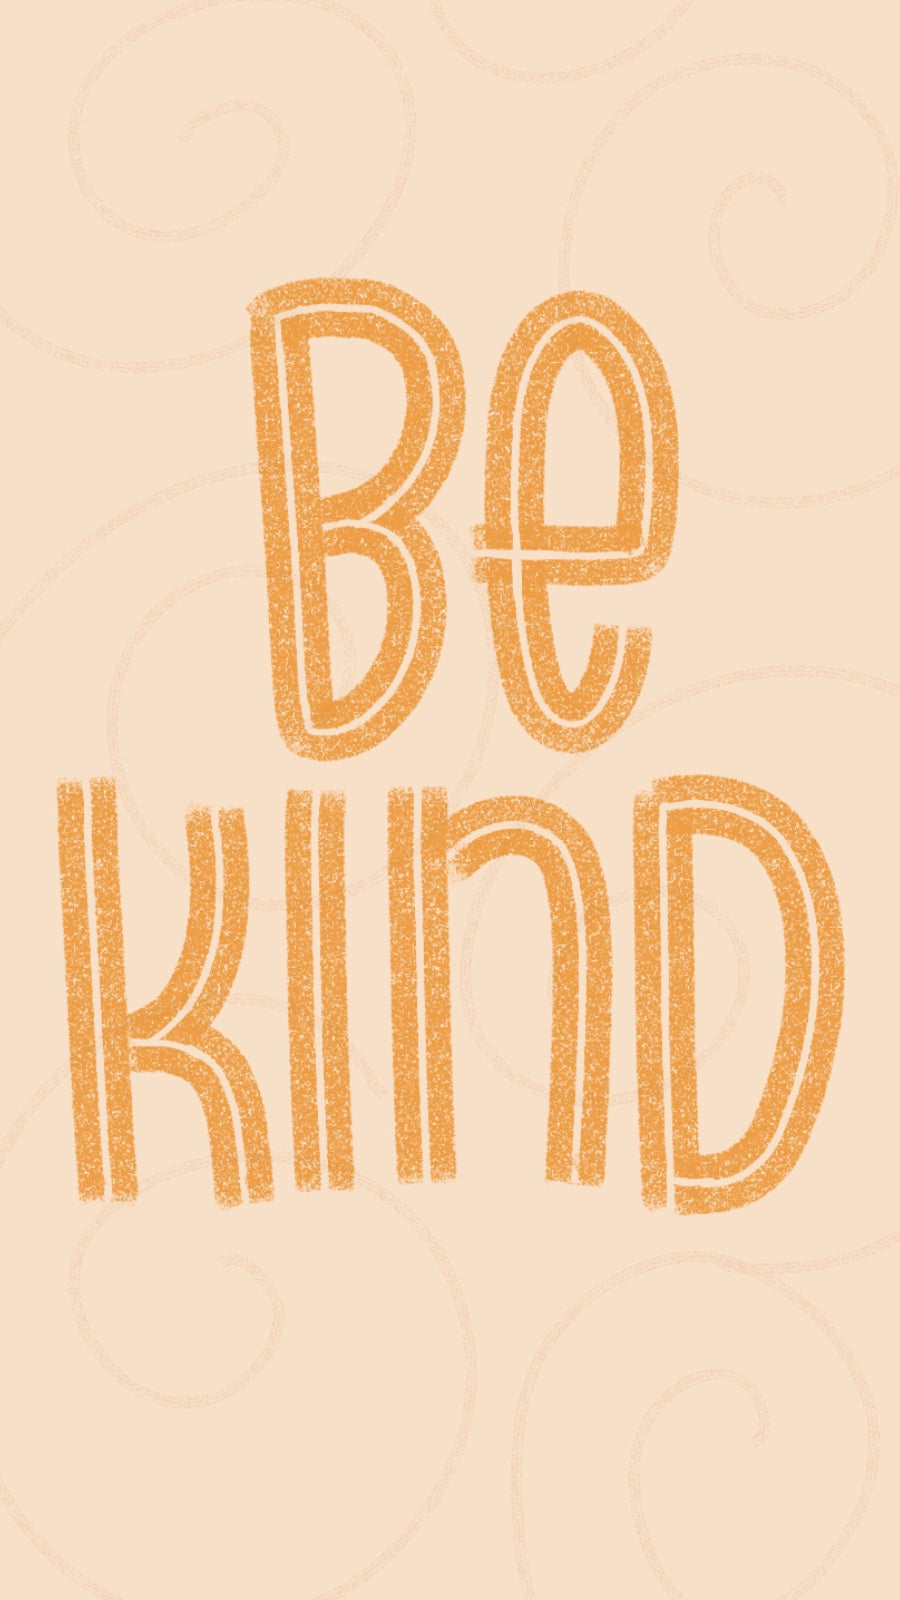 Yellow Be Kind Design for Phone Wallpaper